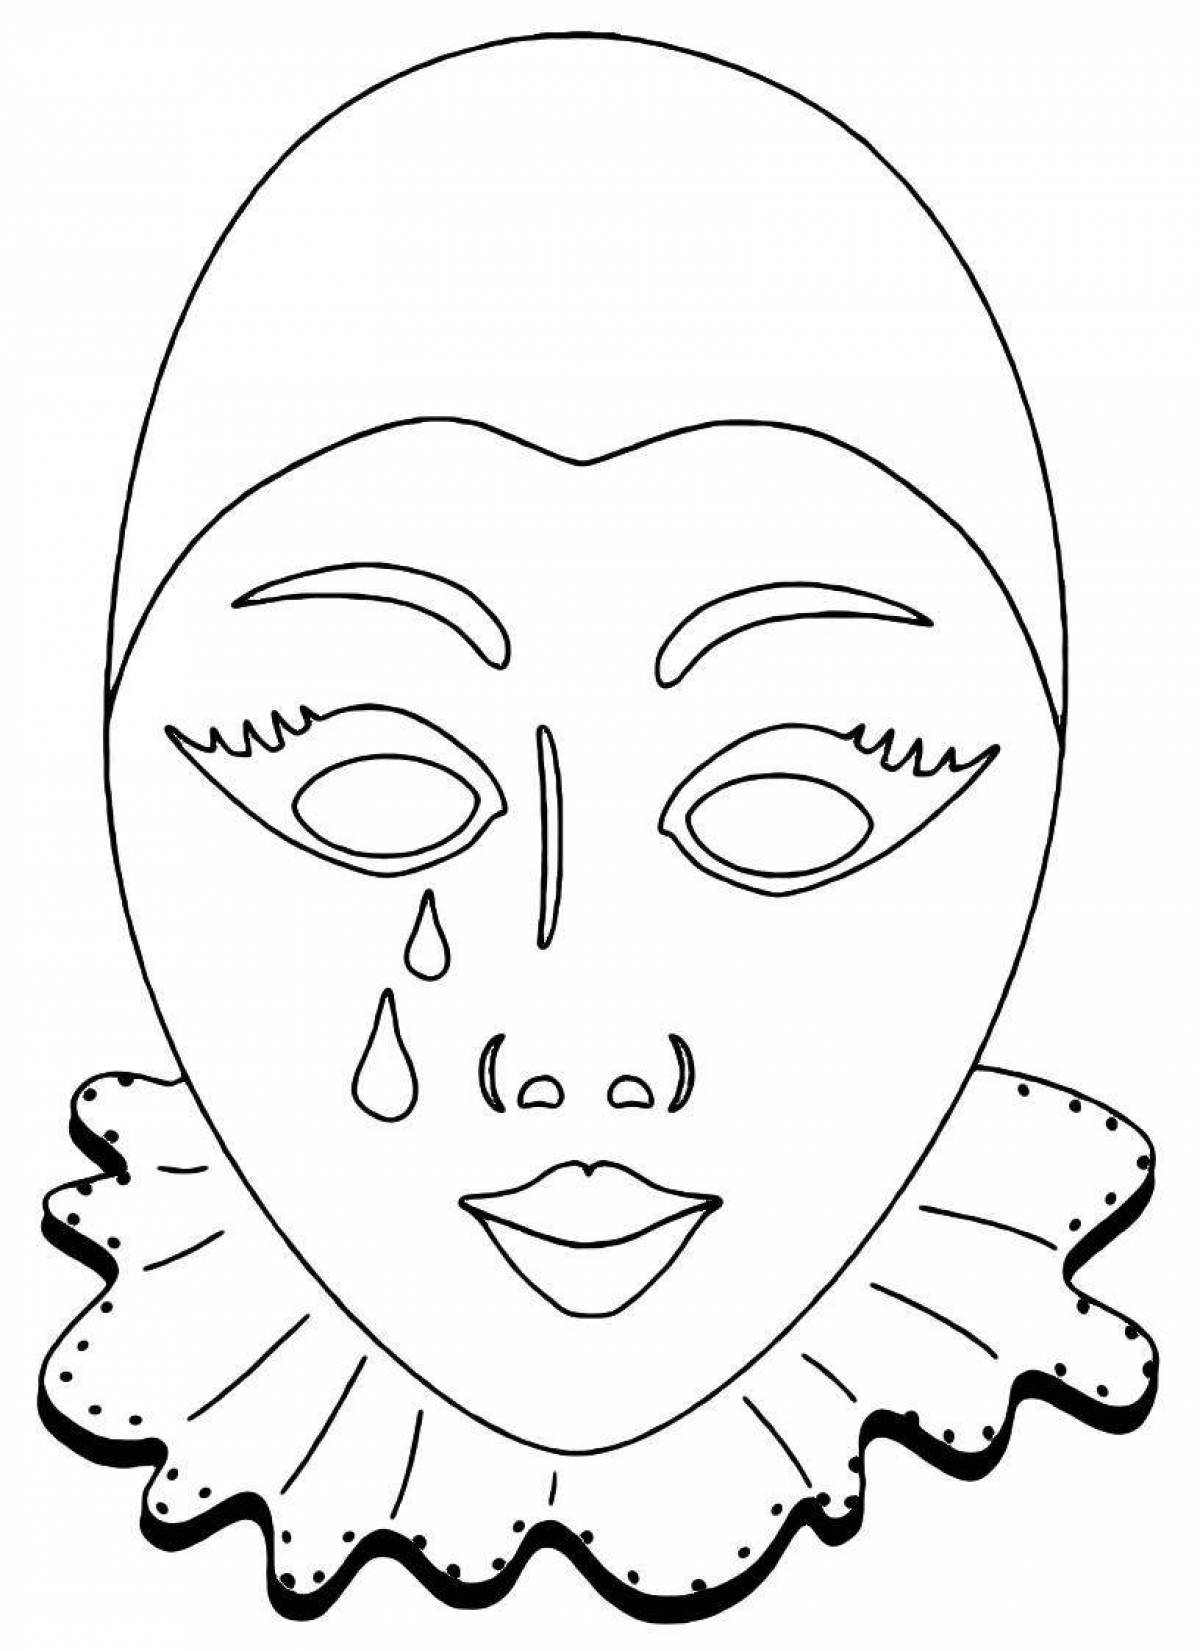 Adorable fabric mask coloring page